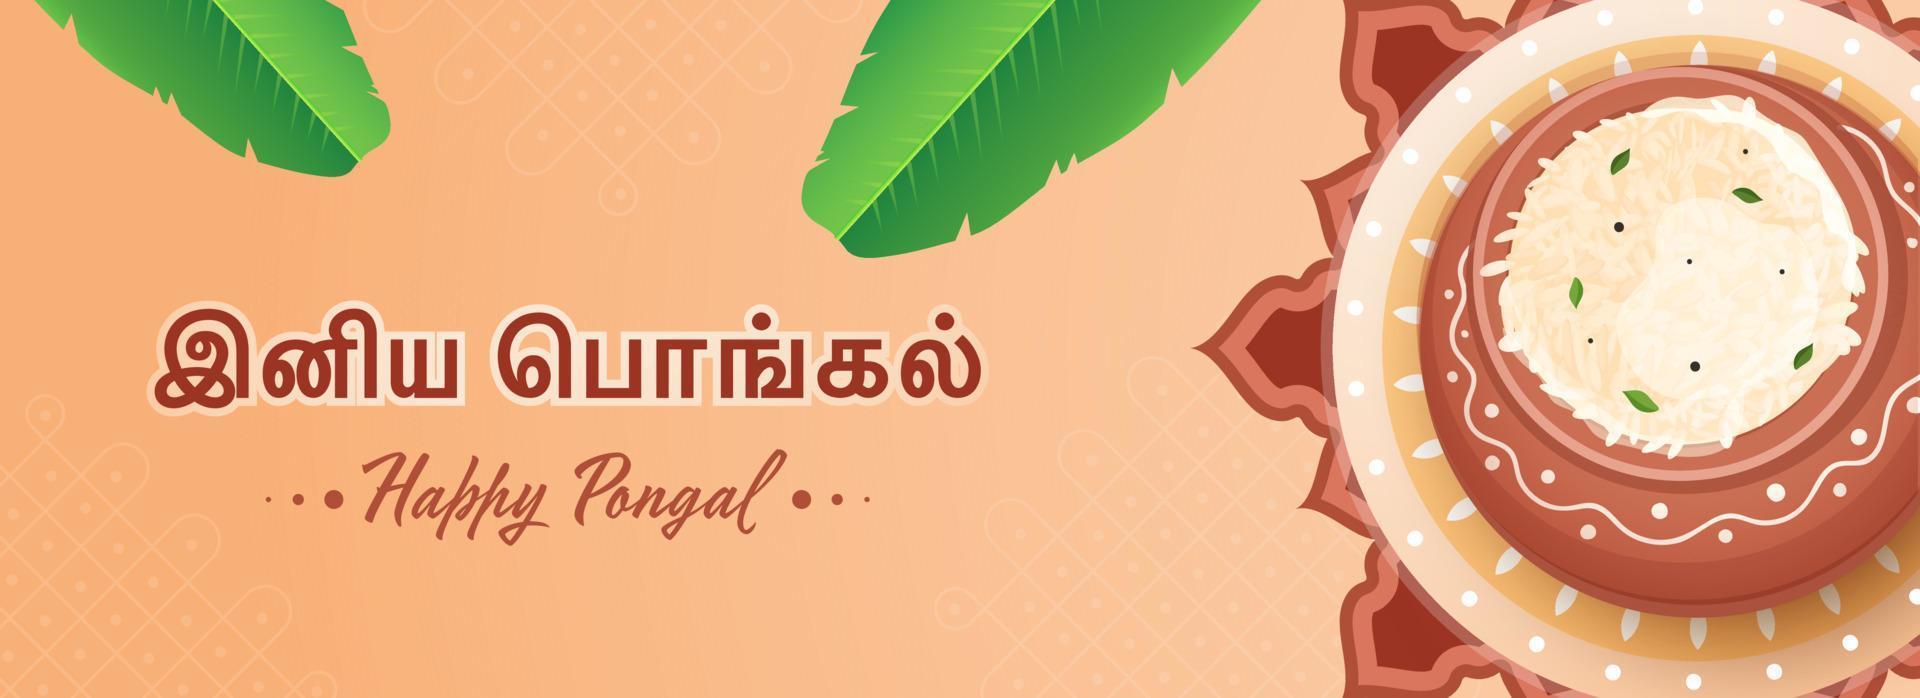 Tamil Language Of Happy Pongal Text With Top View Rice Mud Pot, Banana Leaves On Pastel Orange Background. vector